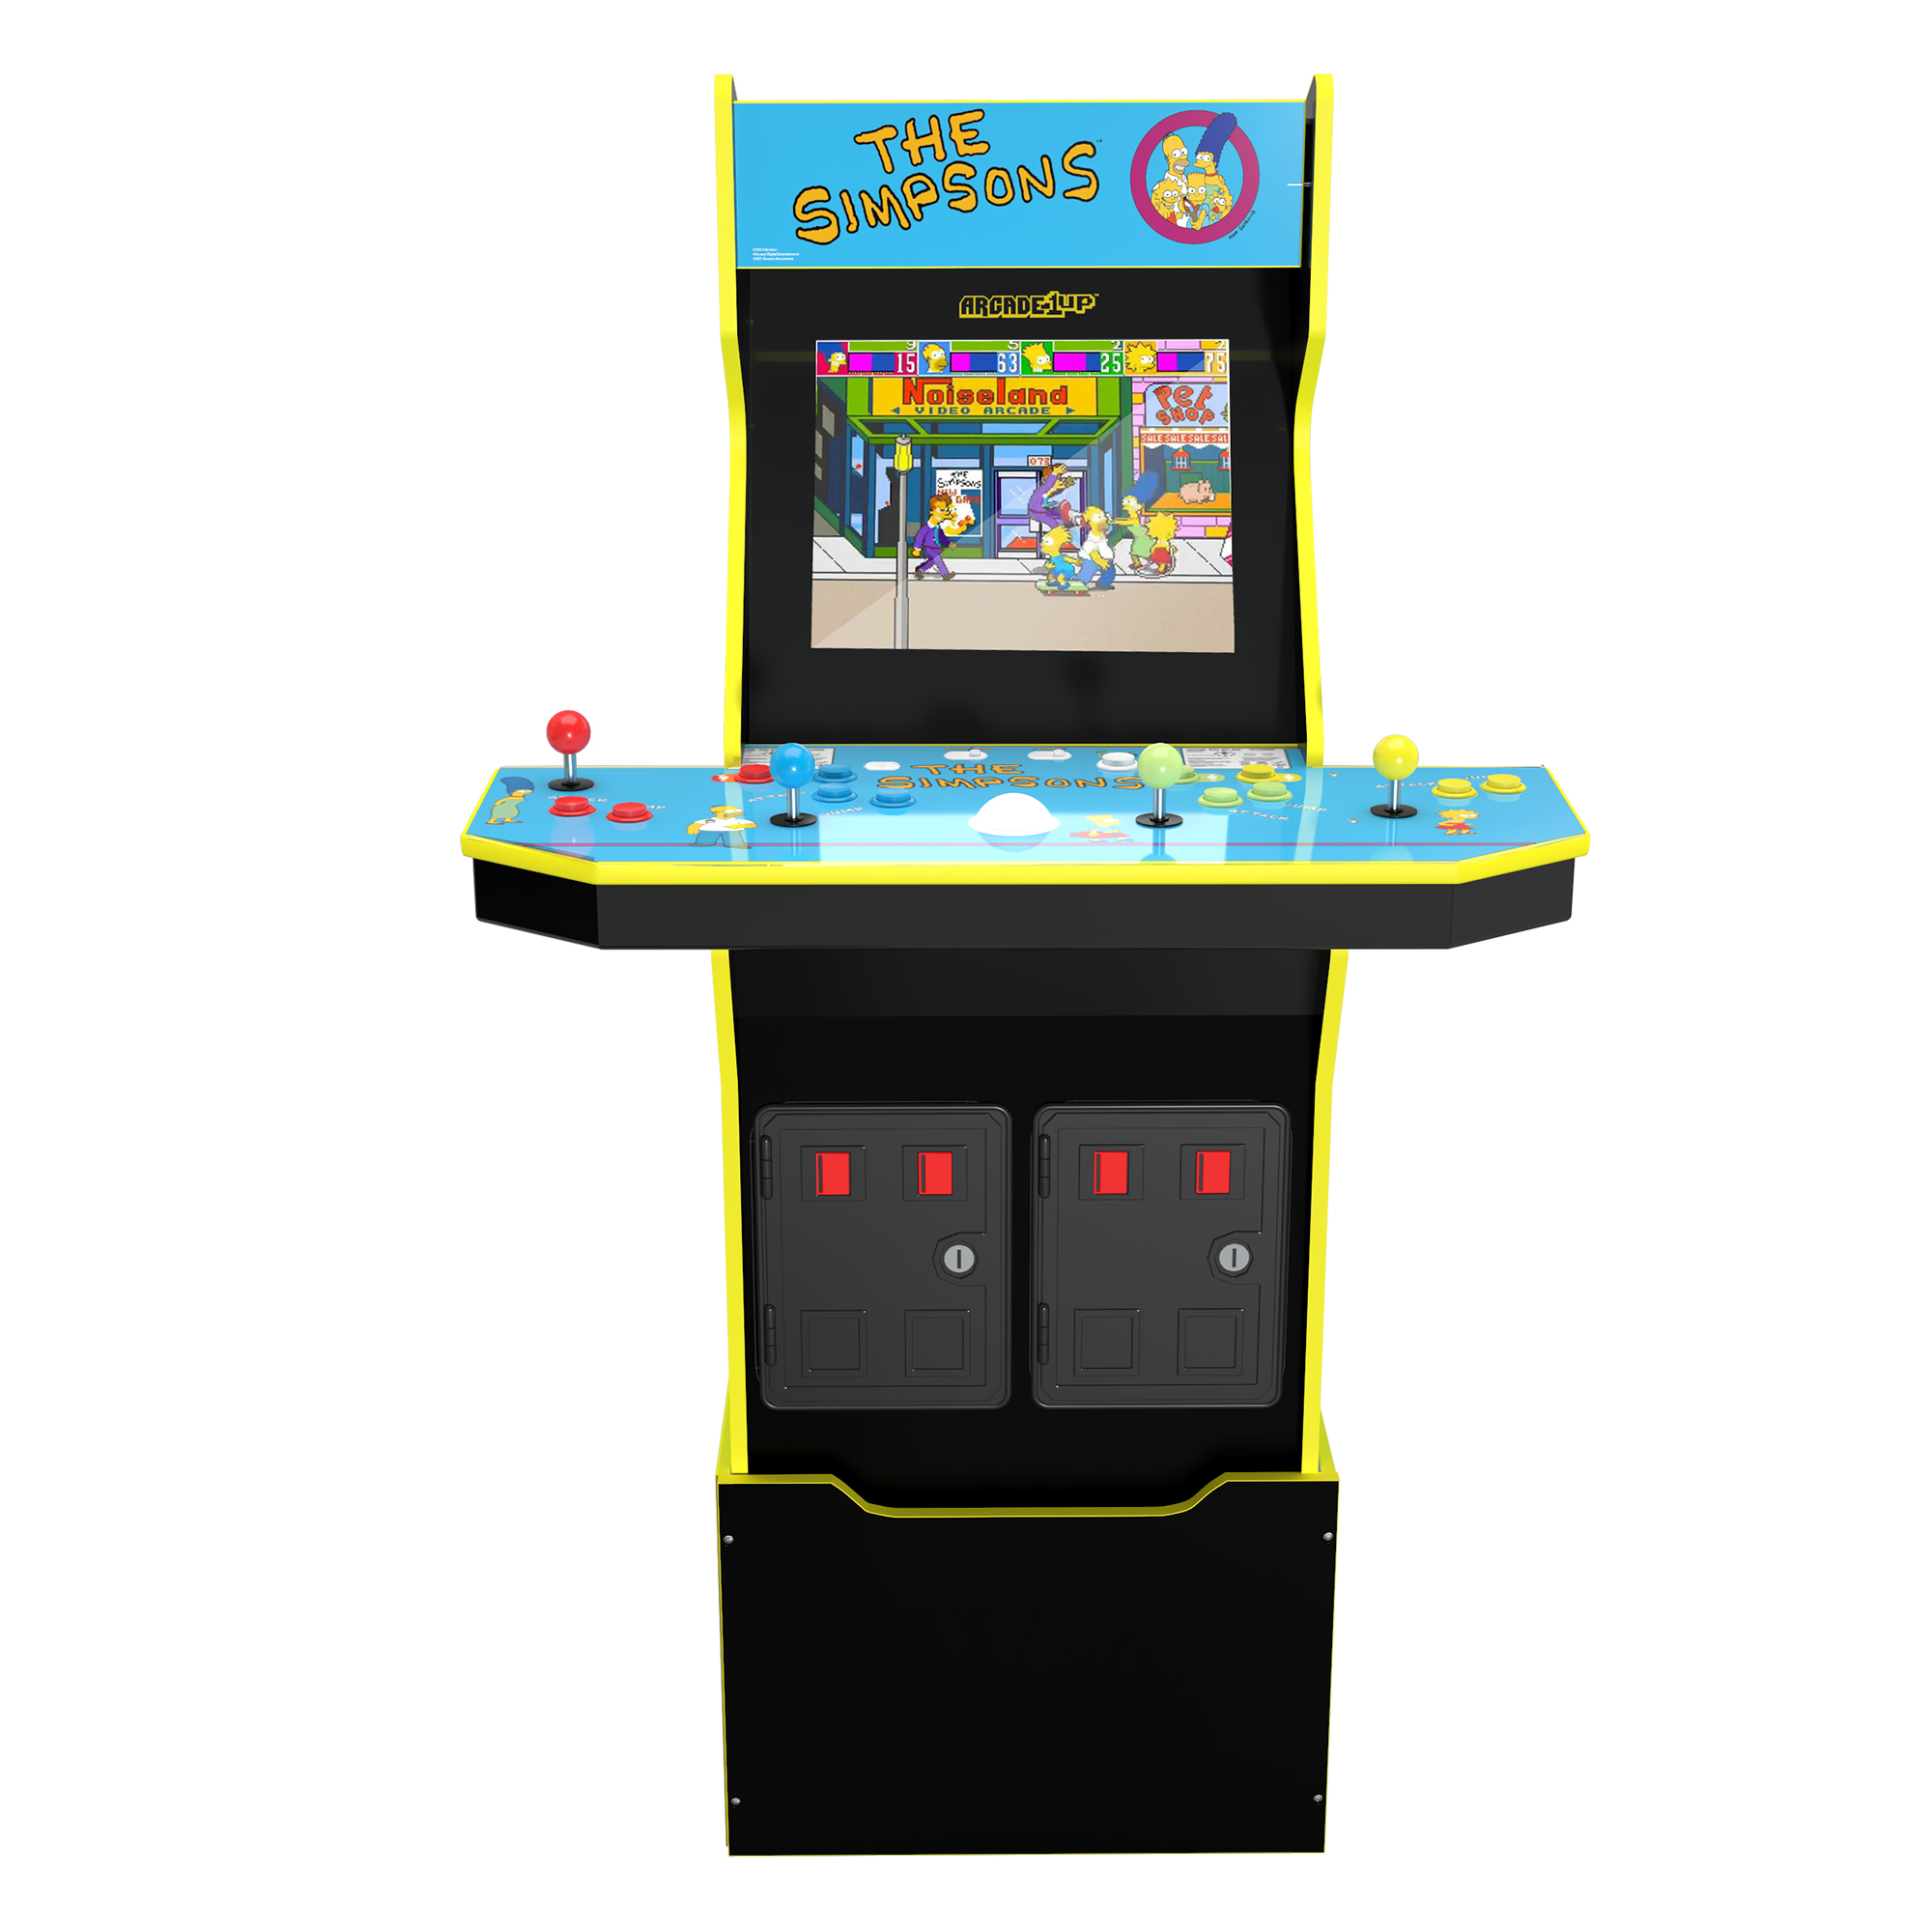 Arcade1UP The Simpsons (4-Player) Arcade with Riser, Lit Marquee, Lit Deck Protector, Wifi, and Exclusive Stool Bundle - image 3 of 10